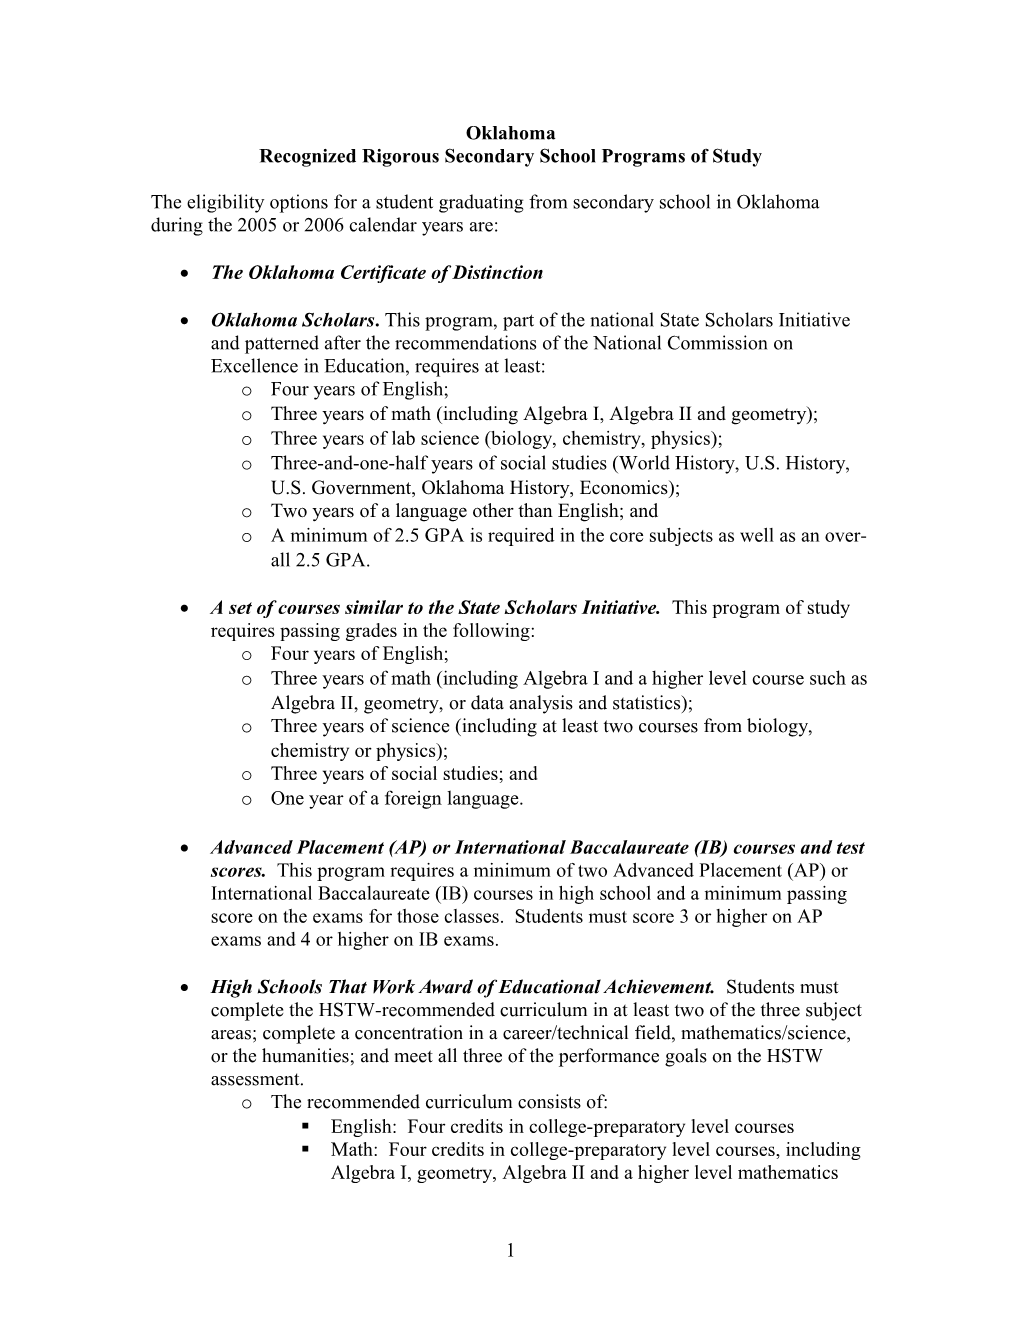 Academic Competitiveness Grants - Attachment to Oklahoma Letter - 2006 (MS Word)